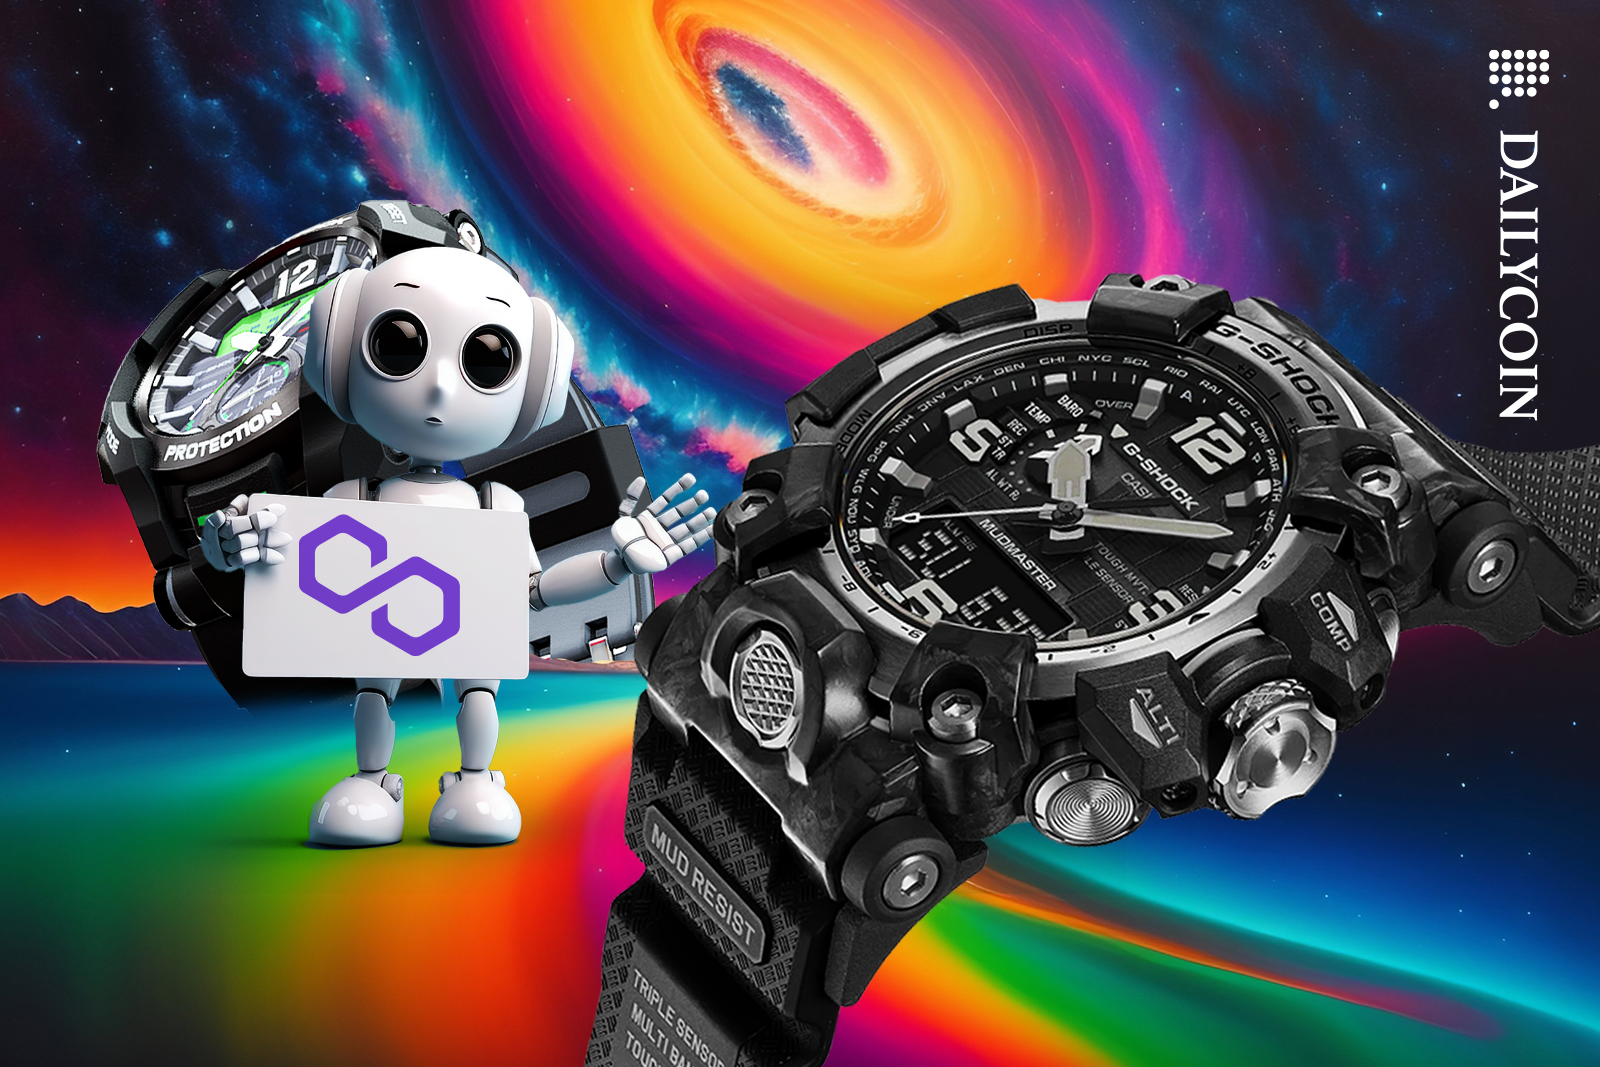 Little robot welcoming you to Polygon G-Shock watch nft world.